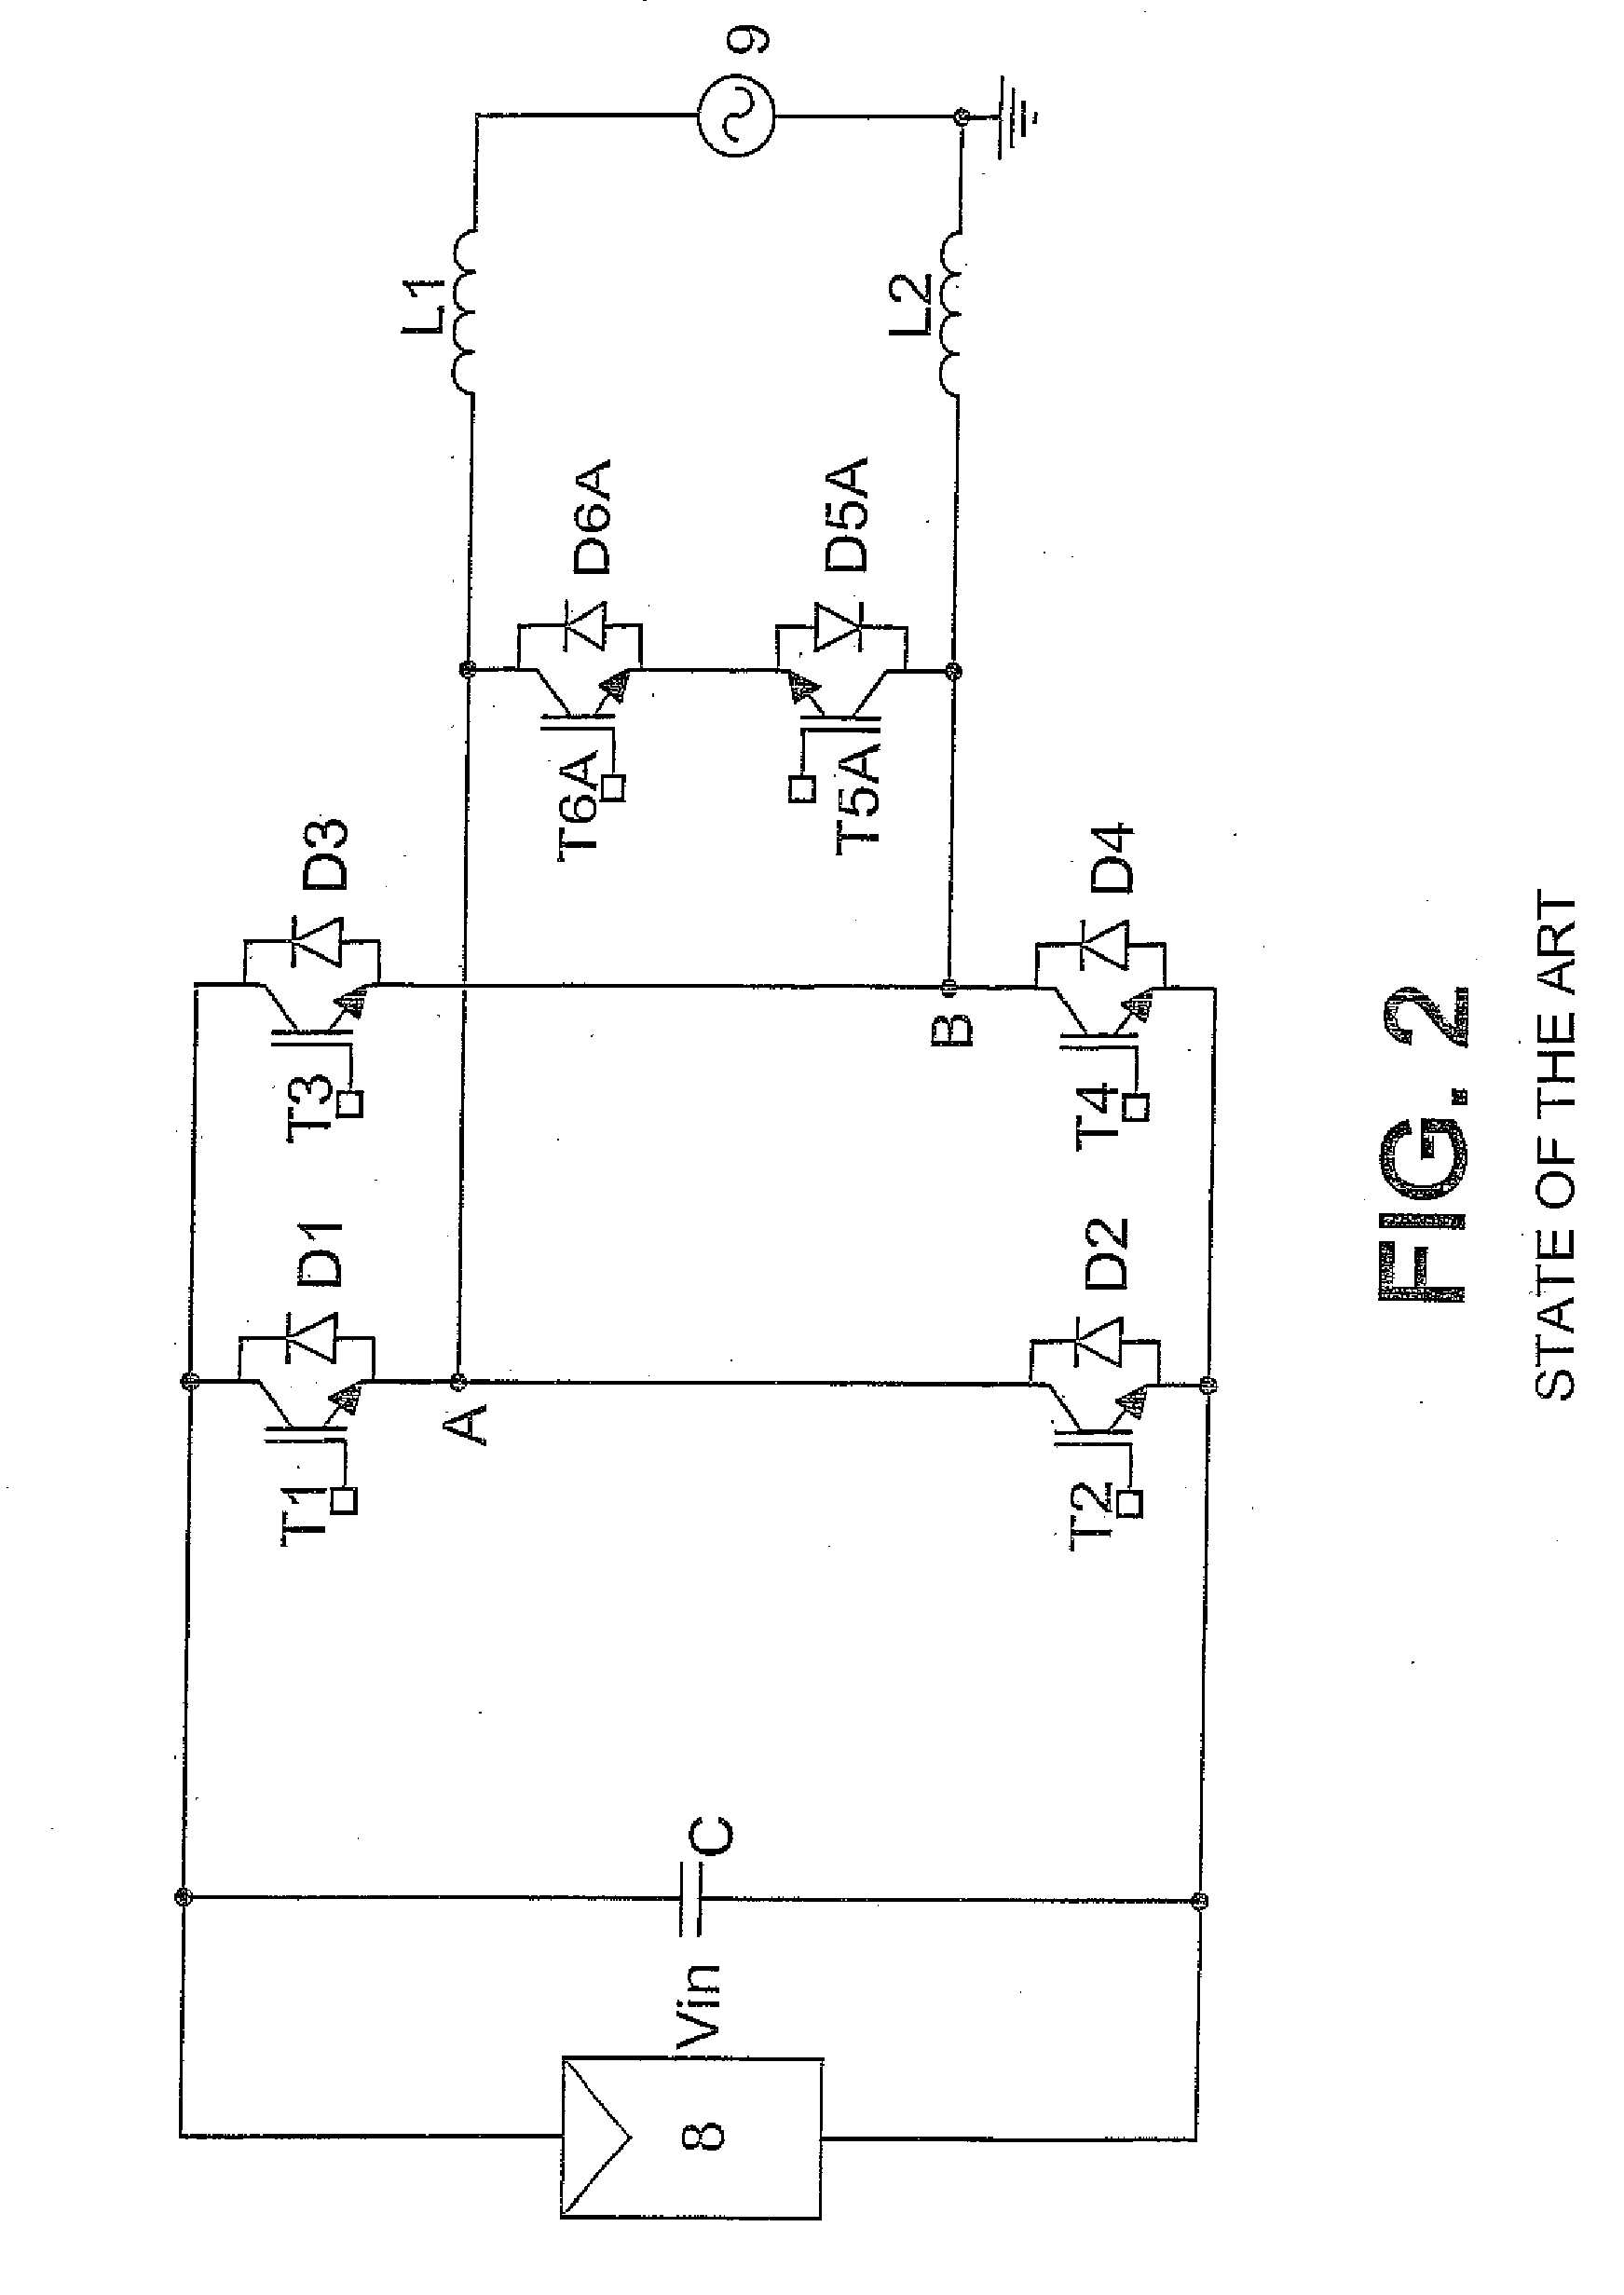 Single-phase inverter circuit to condition and transform direct current electric power into alternating current electric power